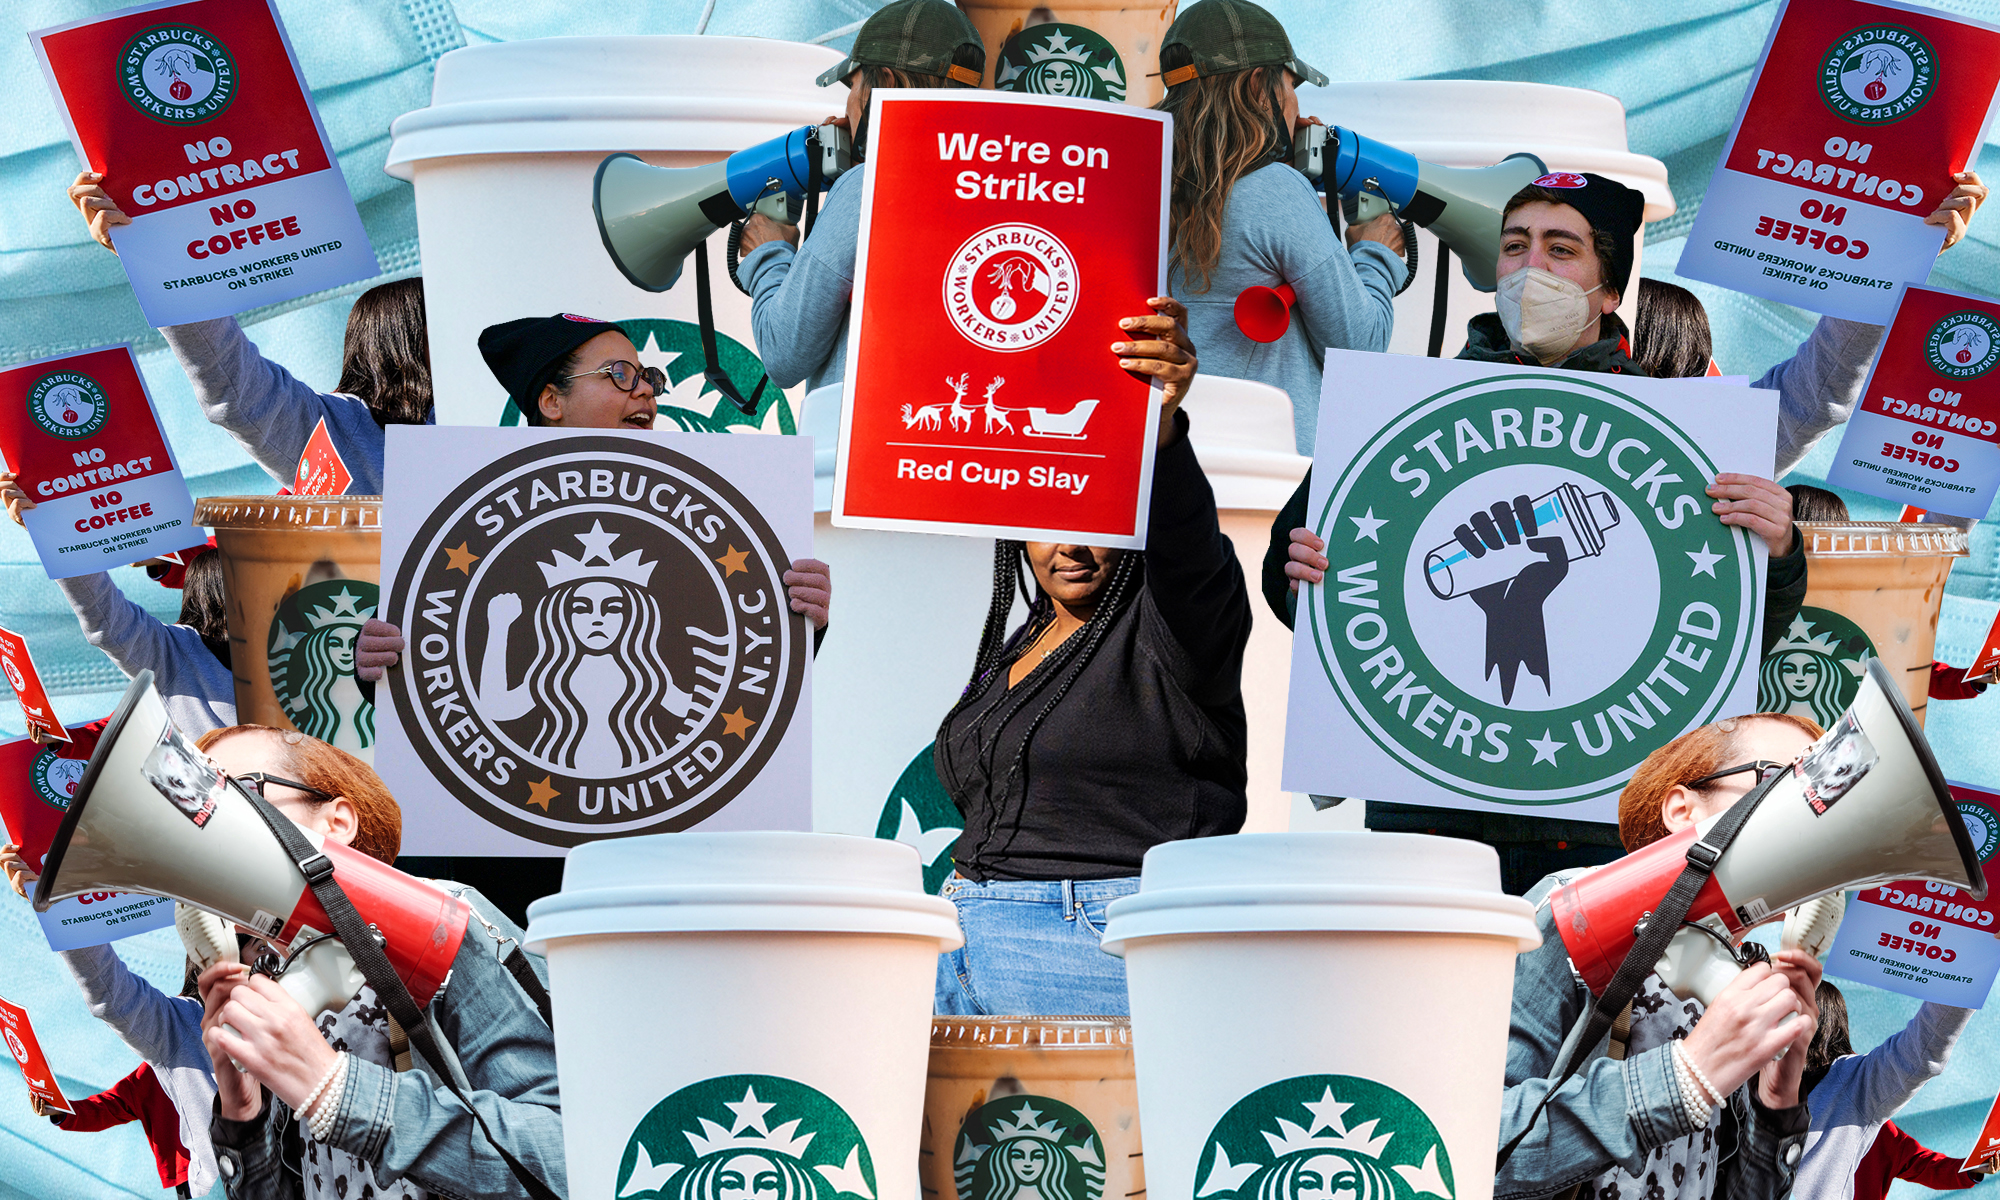 Photo-collage of people holding up signs reading “Starbucks Workers United,” people speaking into bullhorns, and disposable Starbucks coffee cups.